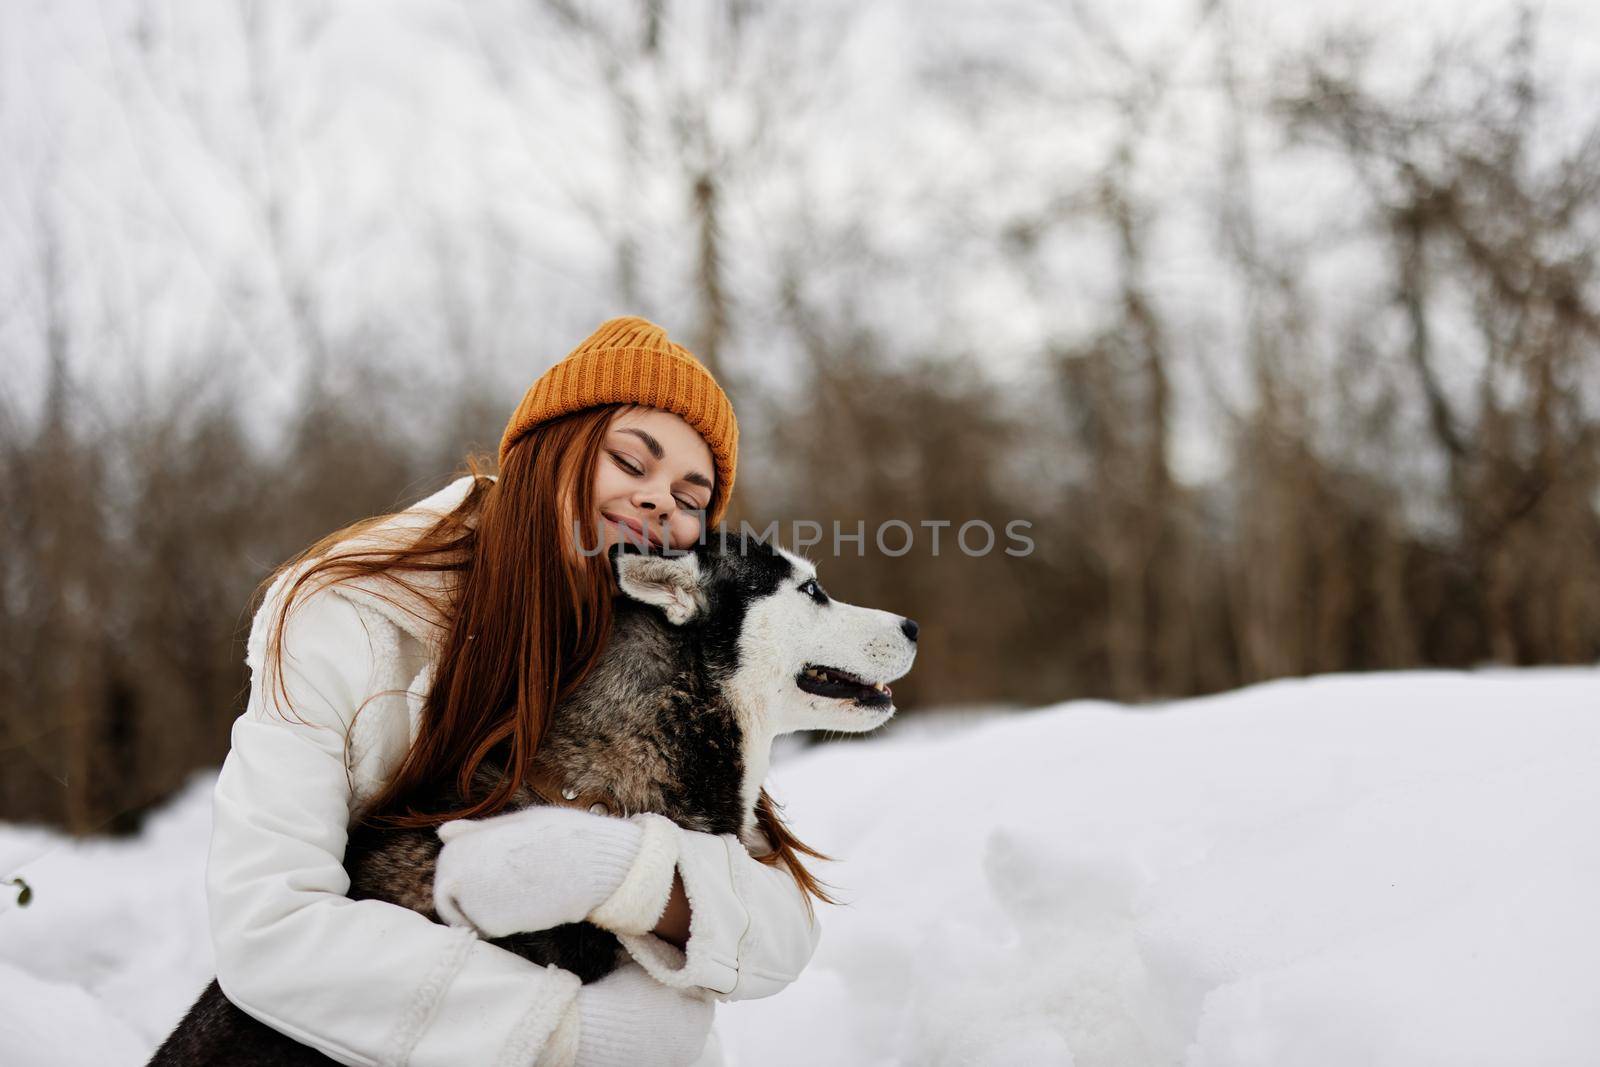 woman outdoors in a field in winter walking with a dog Lifestyle by SHOTPRIME